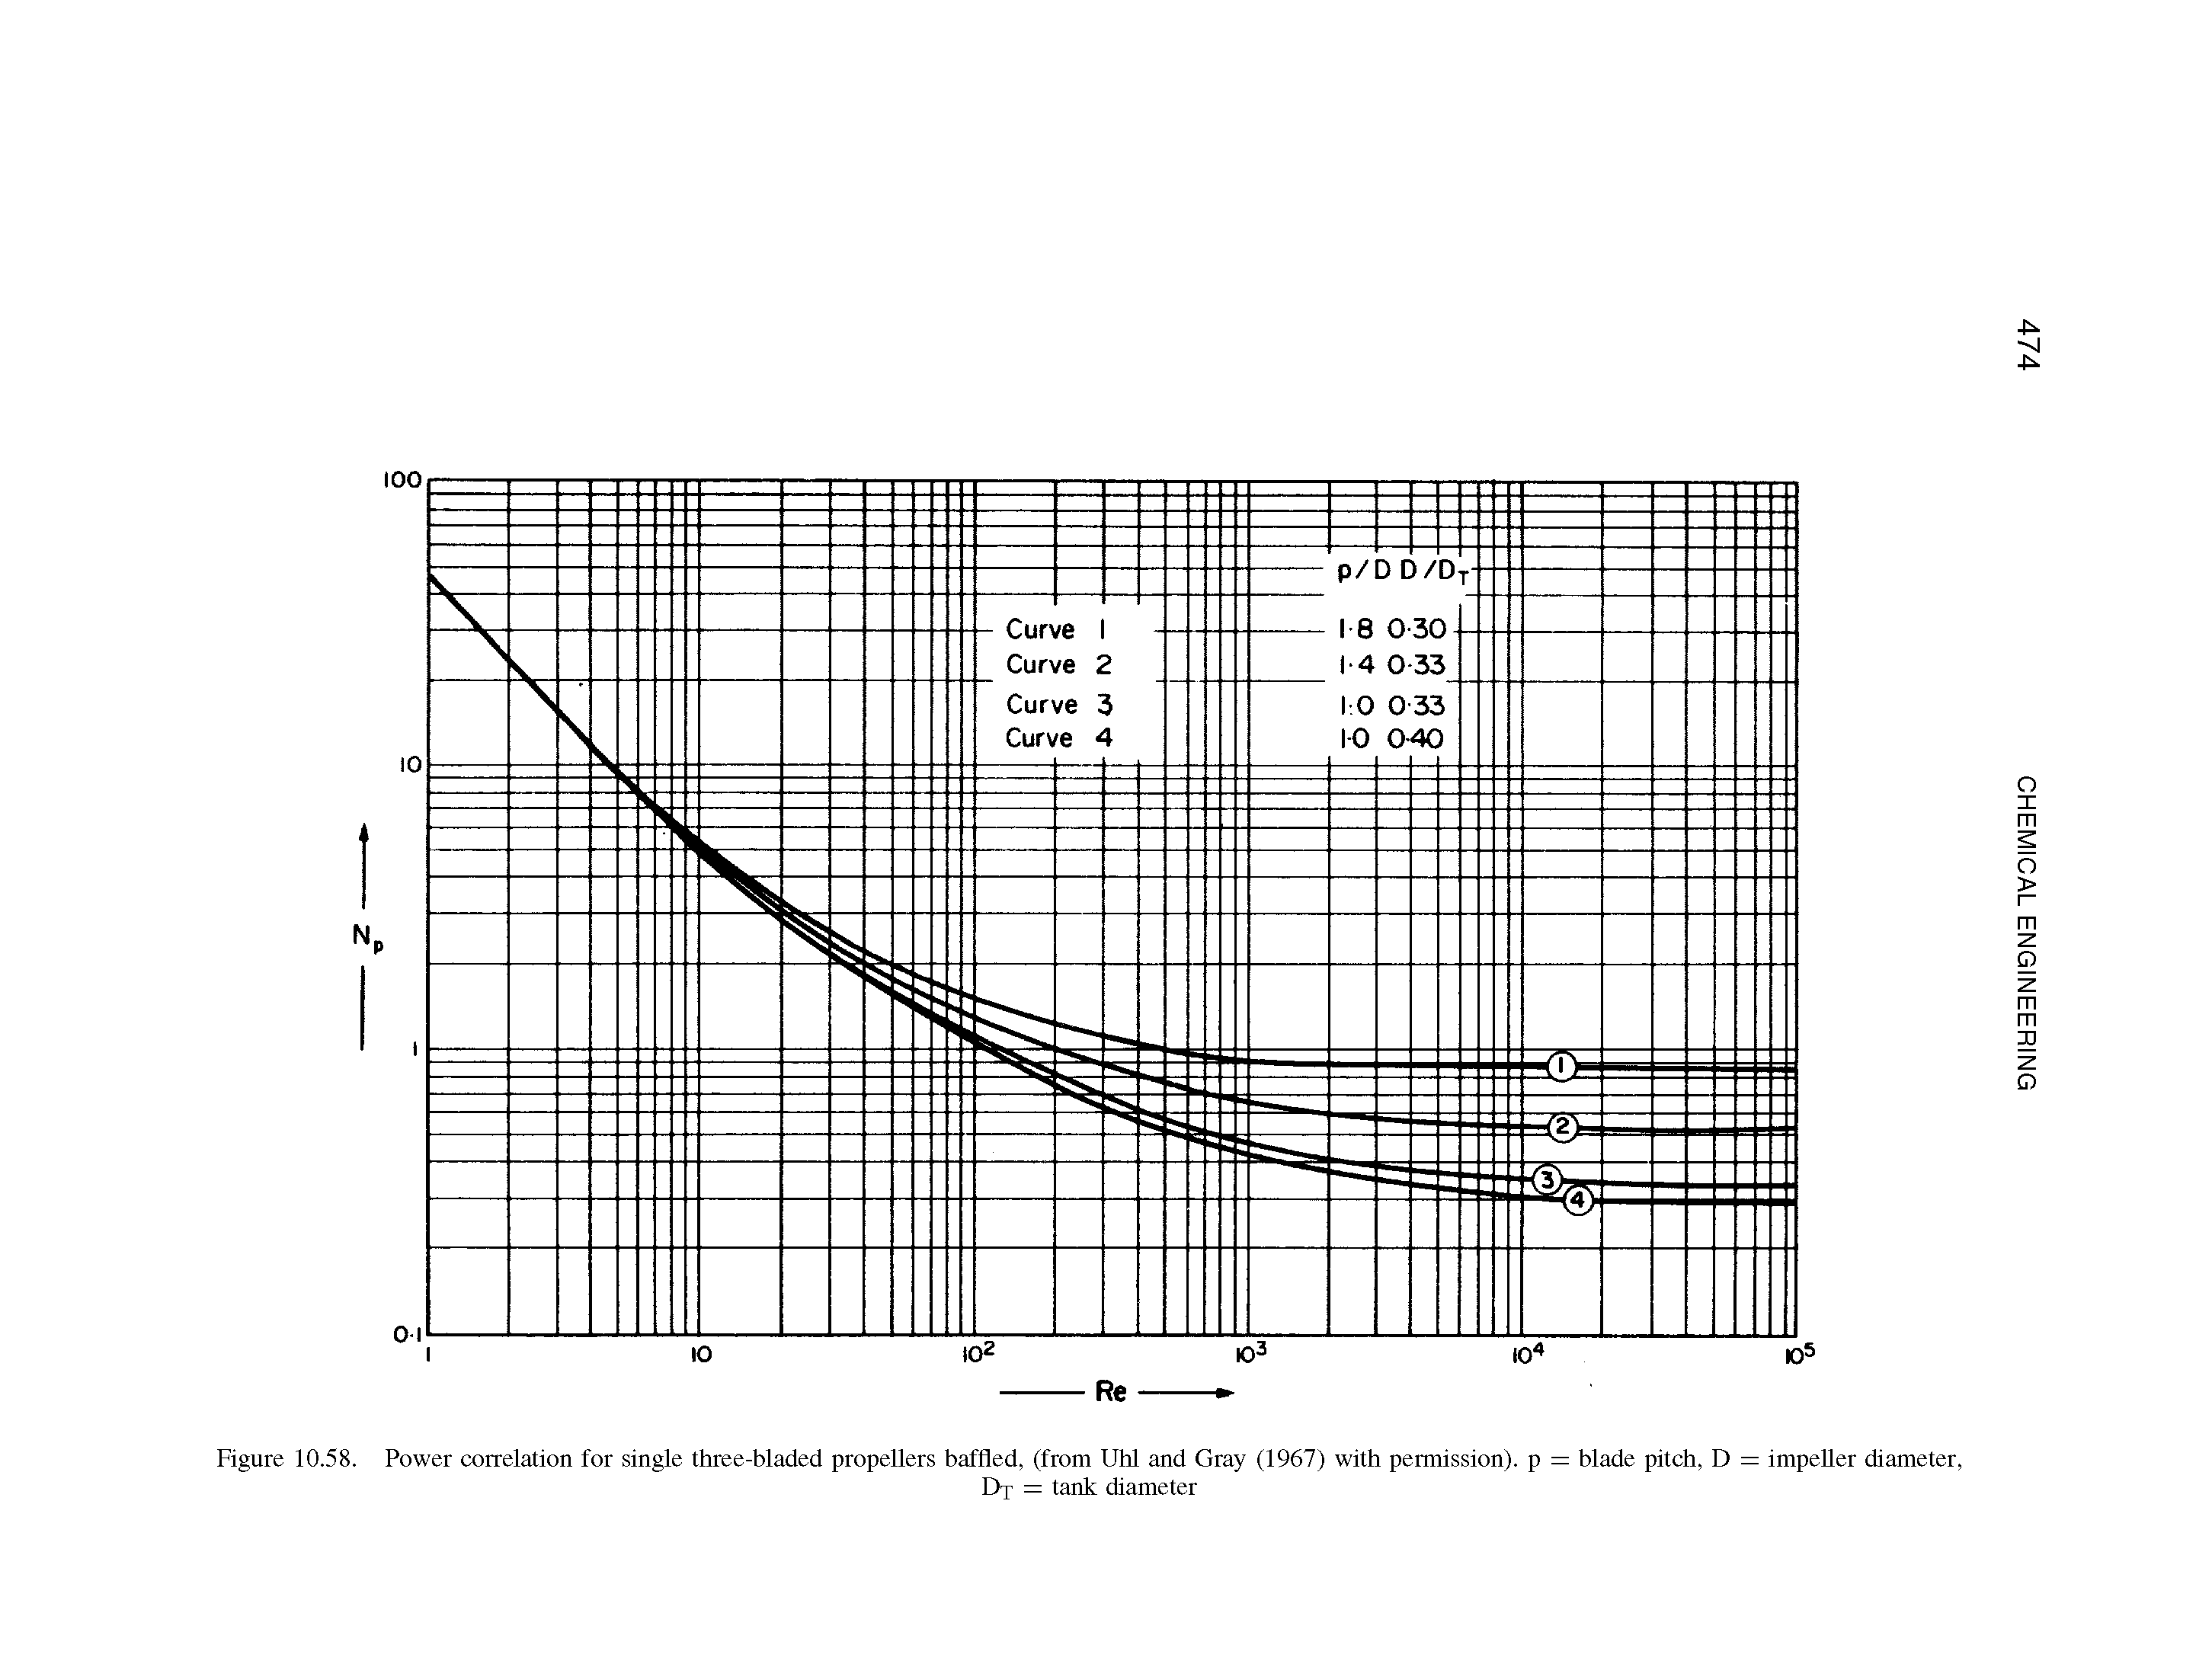 Figure 10.58. Power correlation for single three-bladed propellers baffled, (from Uhl and Gray (1967) with permission), p = blade pitch, D = impeller diameter,...